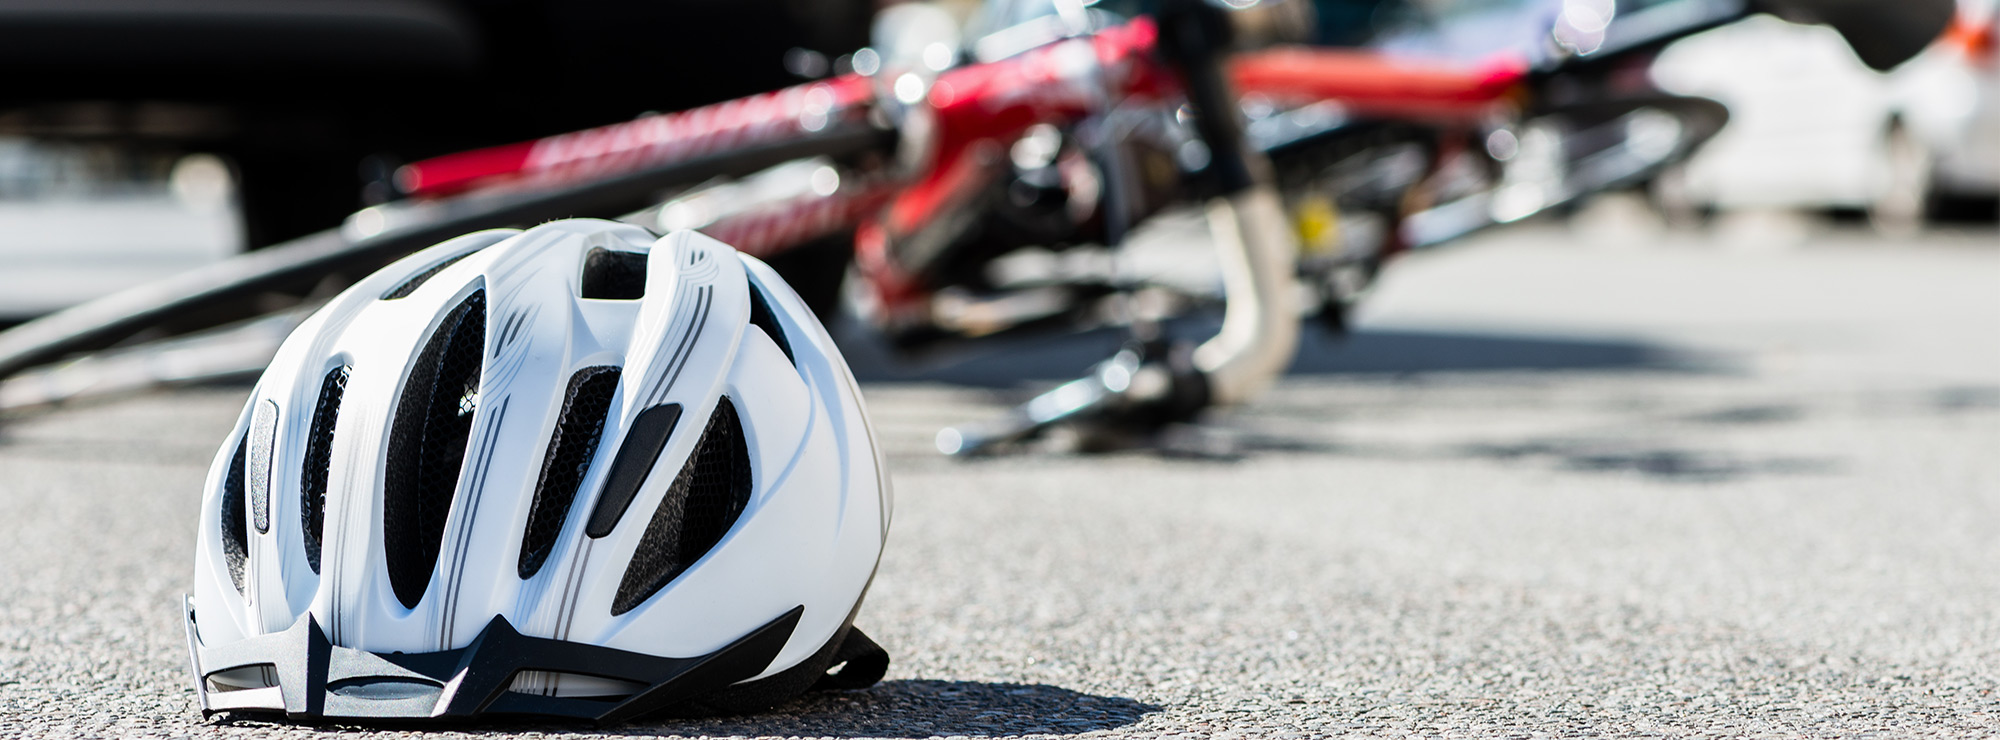 Helmet on the ground after bicycle accident